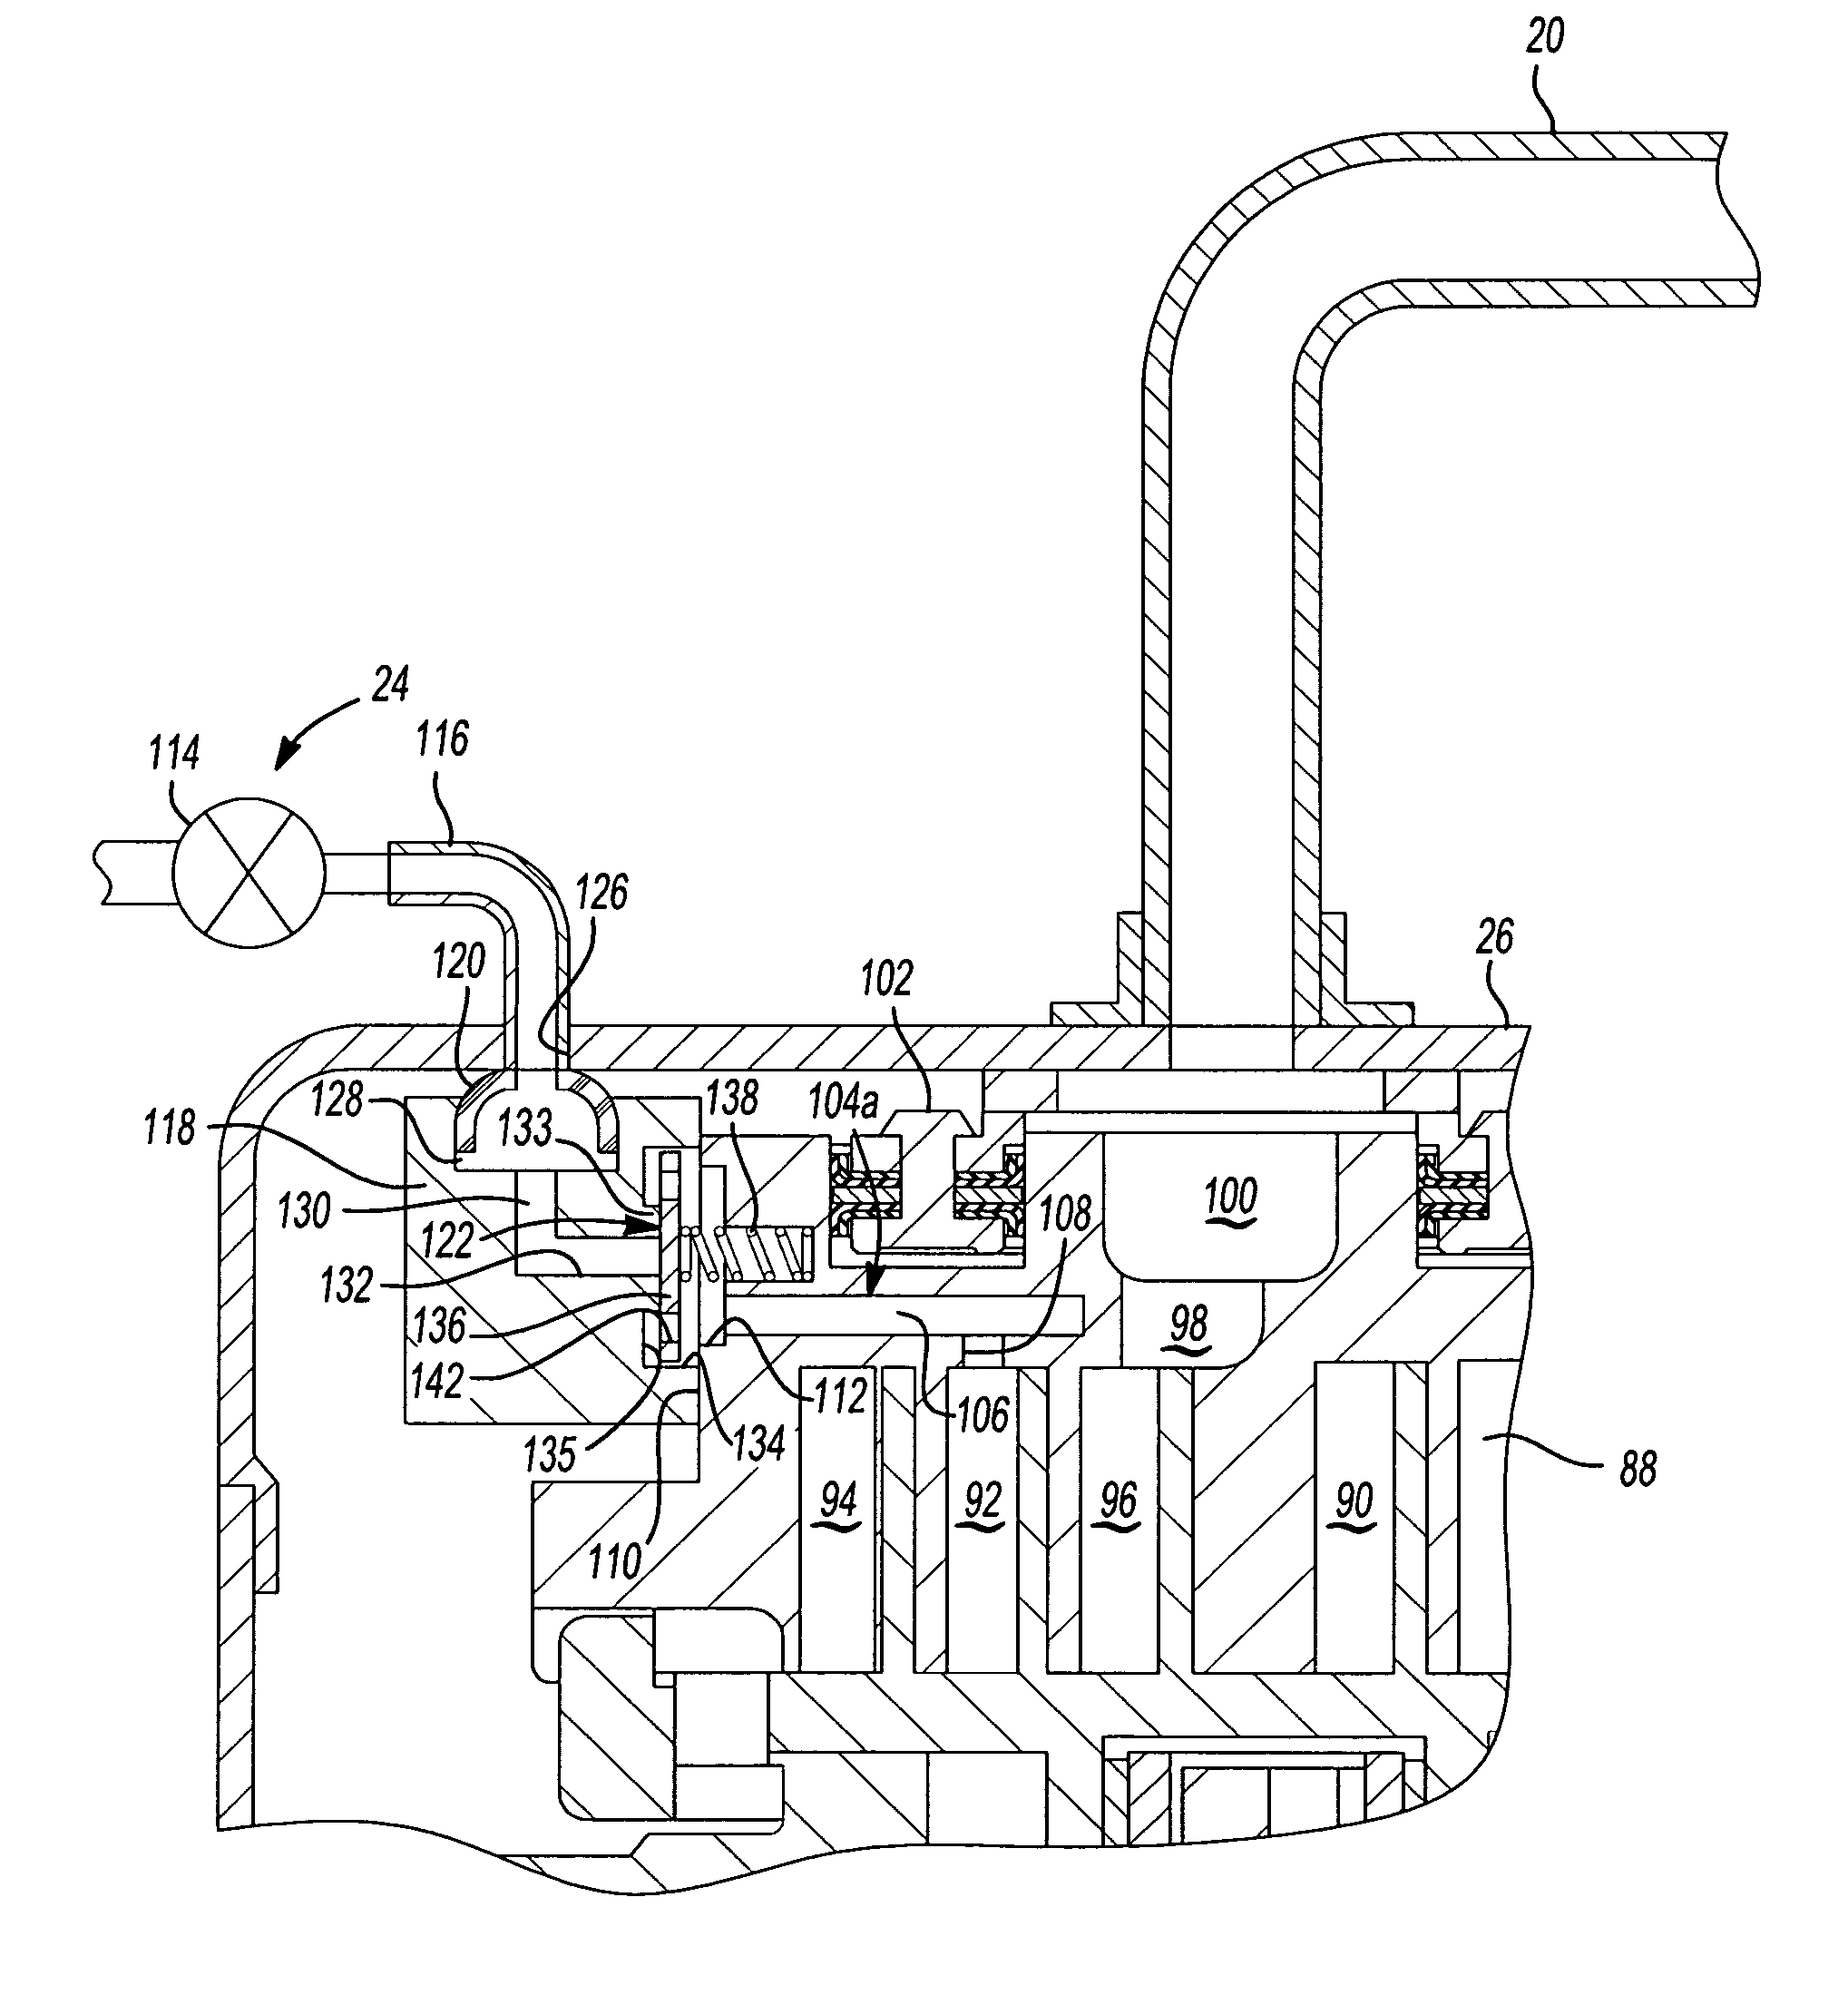 Vapor injection system for a scroll compressor